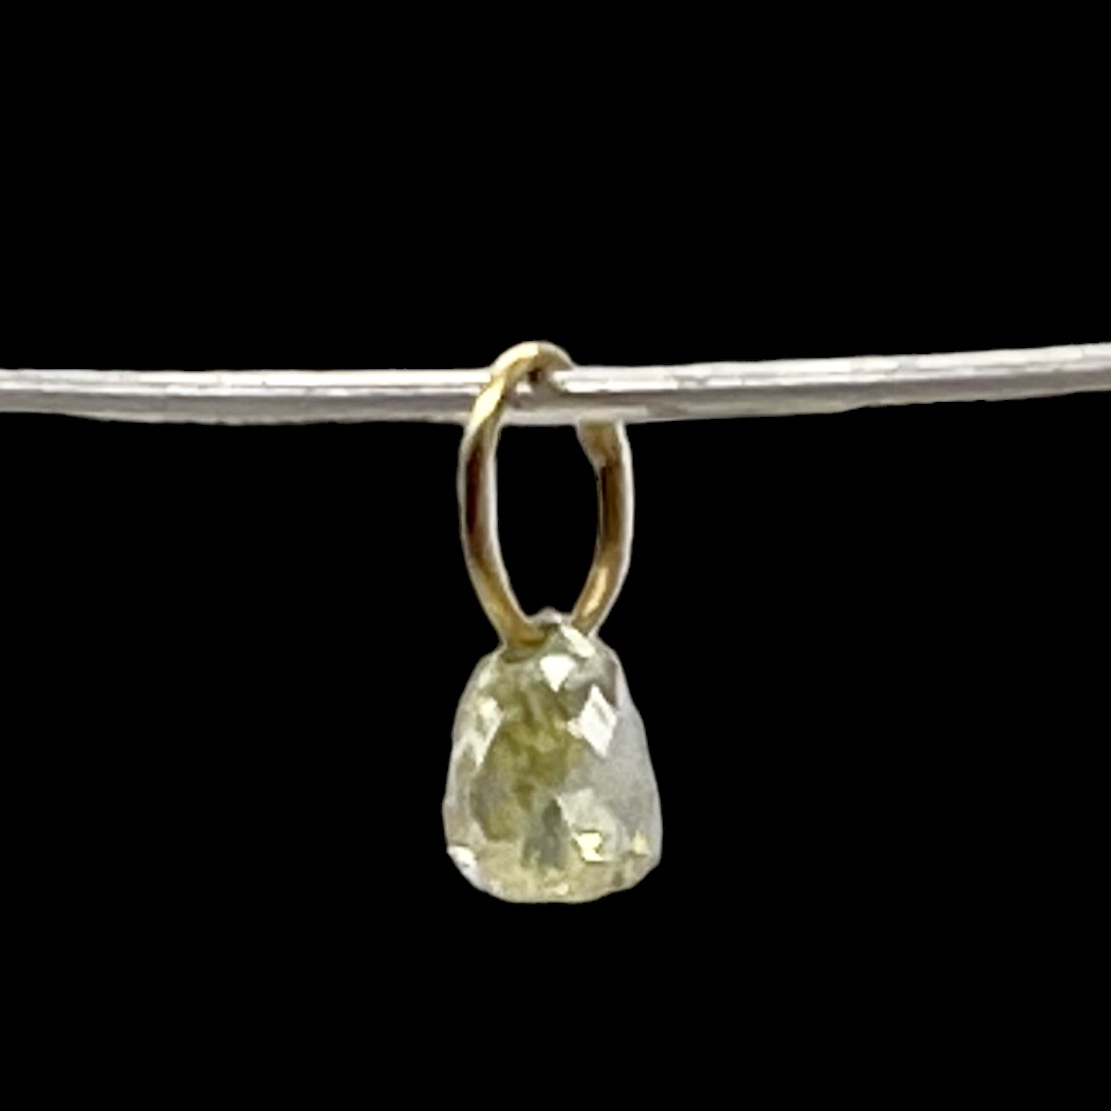 0.23cts Natural Canary Diamond 18K Gold Pendant | 3x2.5x2.25mm | - image 3 of 12